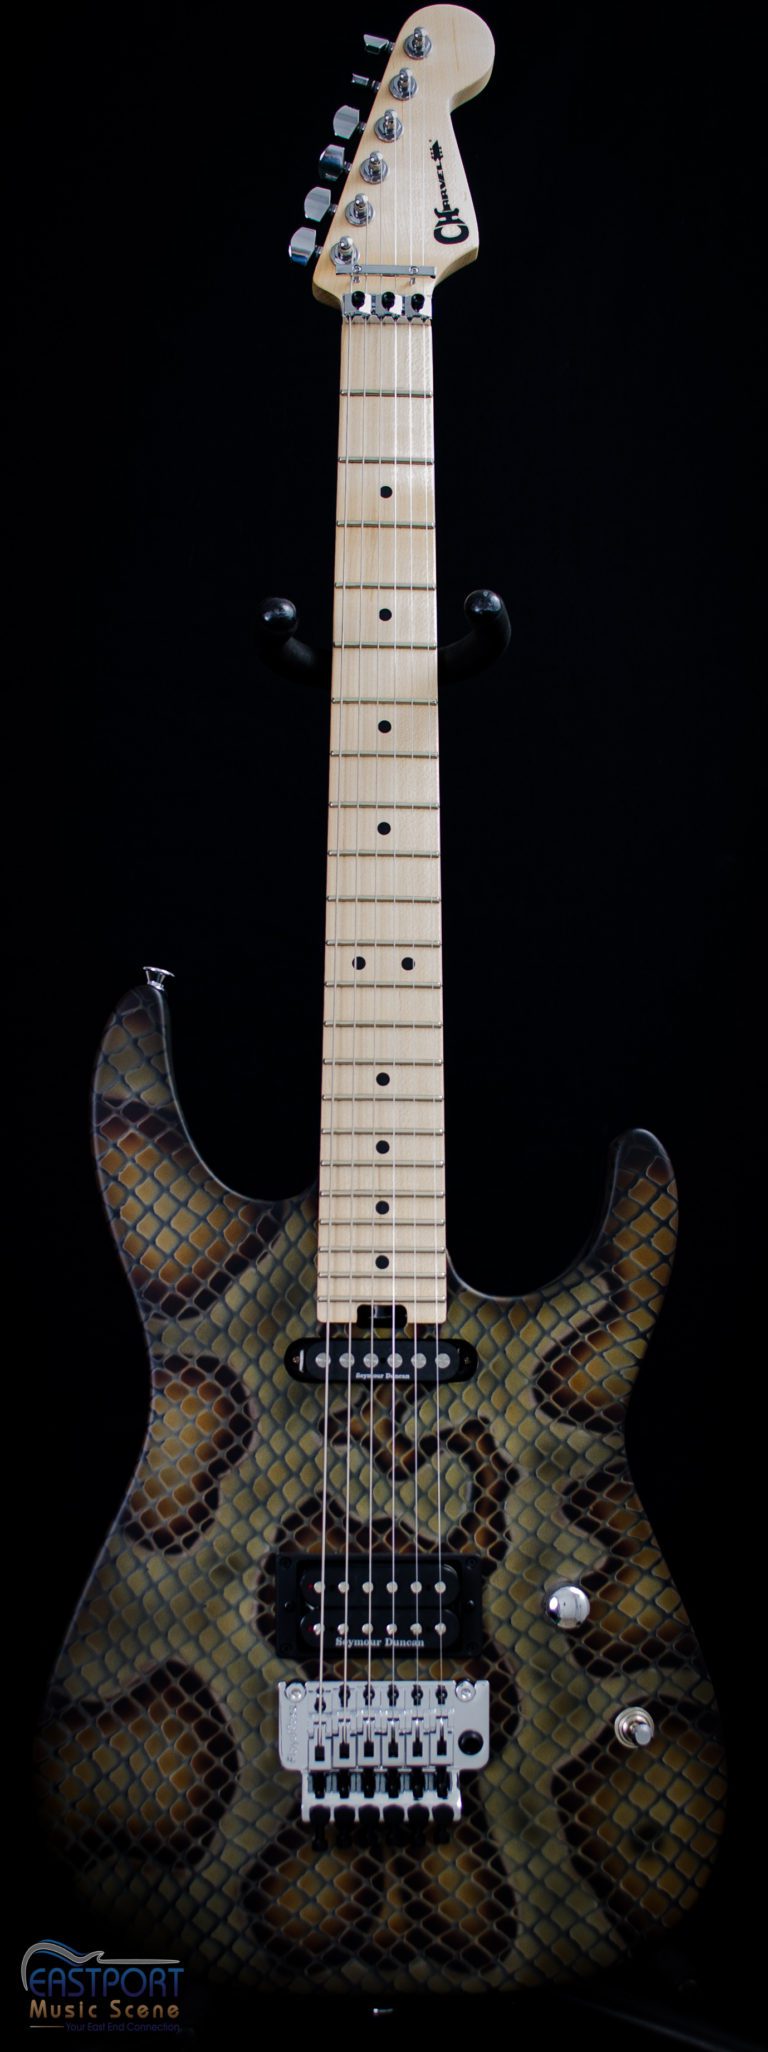 A guitar with a pattern of black and brown.